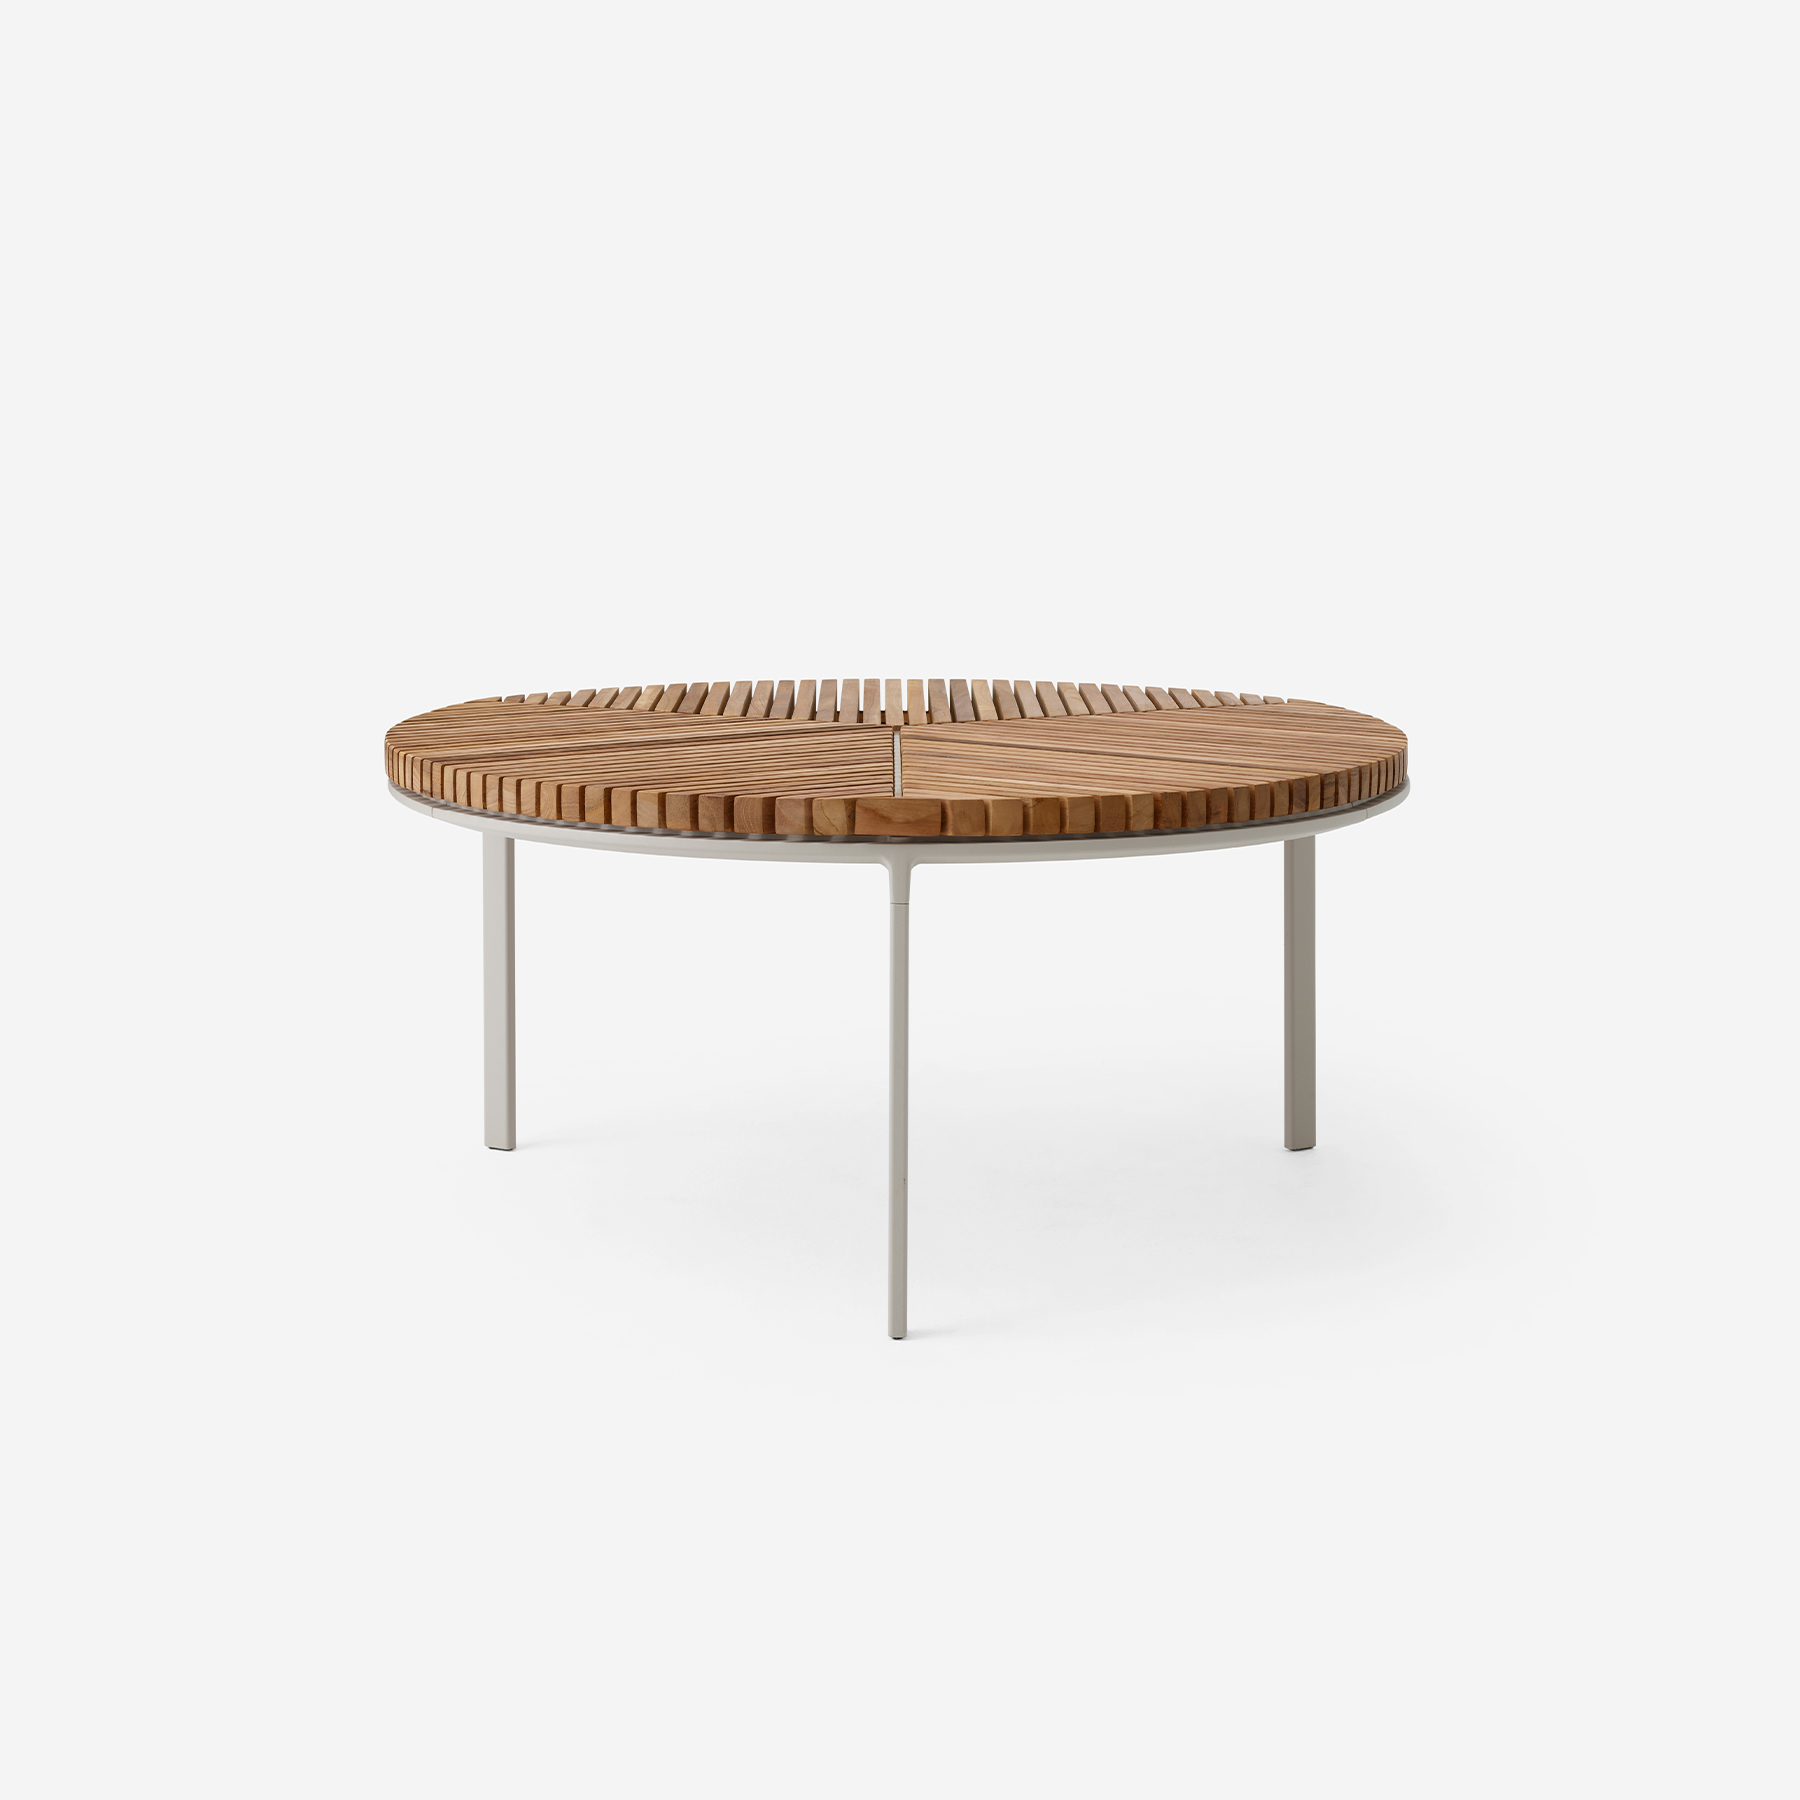 vipp-716-open-air-coffee-table-o90-teak-FRONT PROJECTVIPP